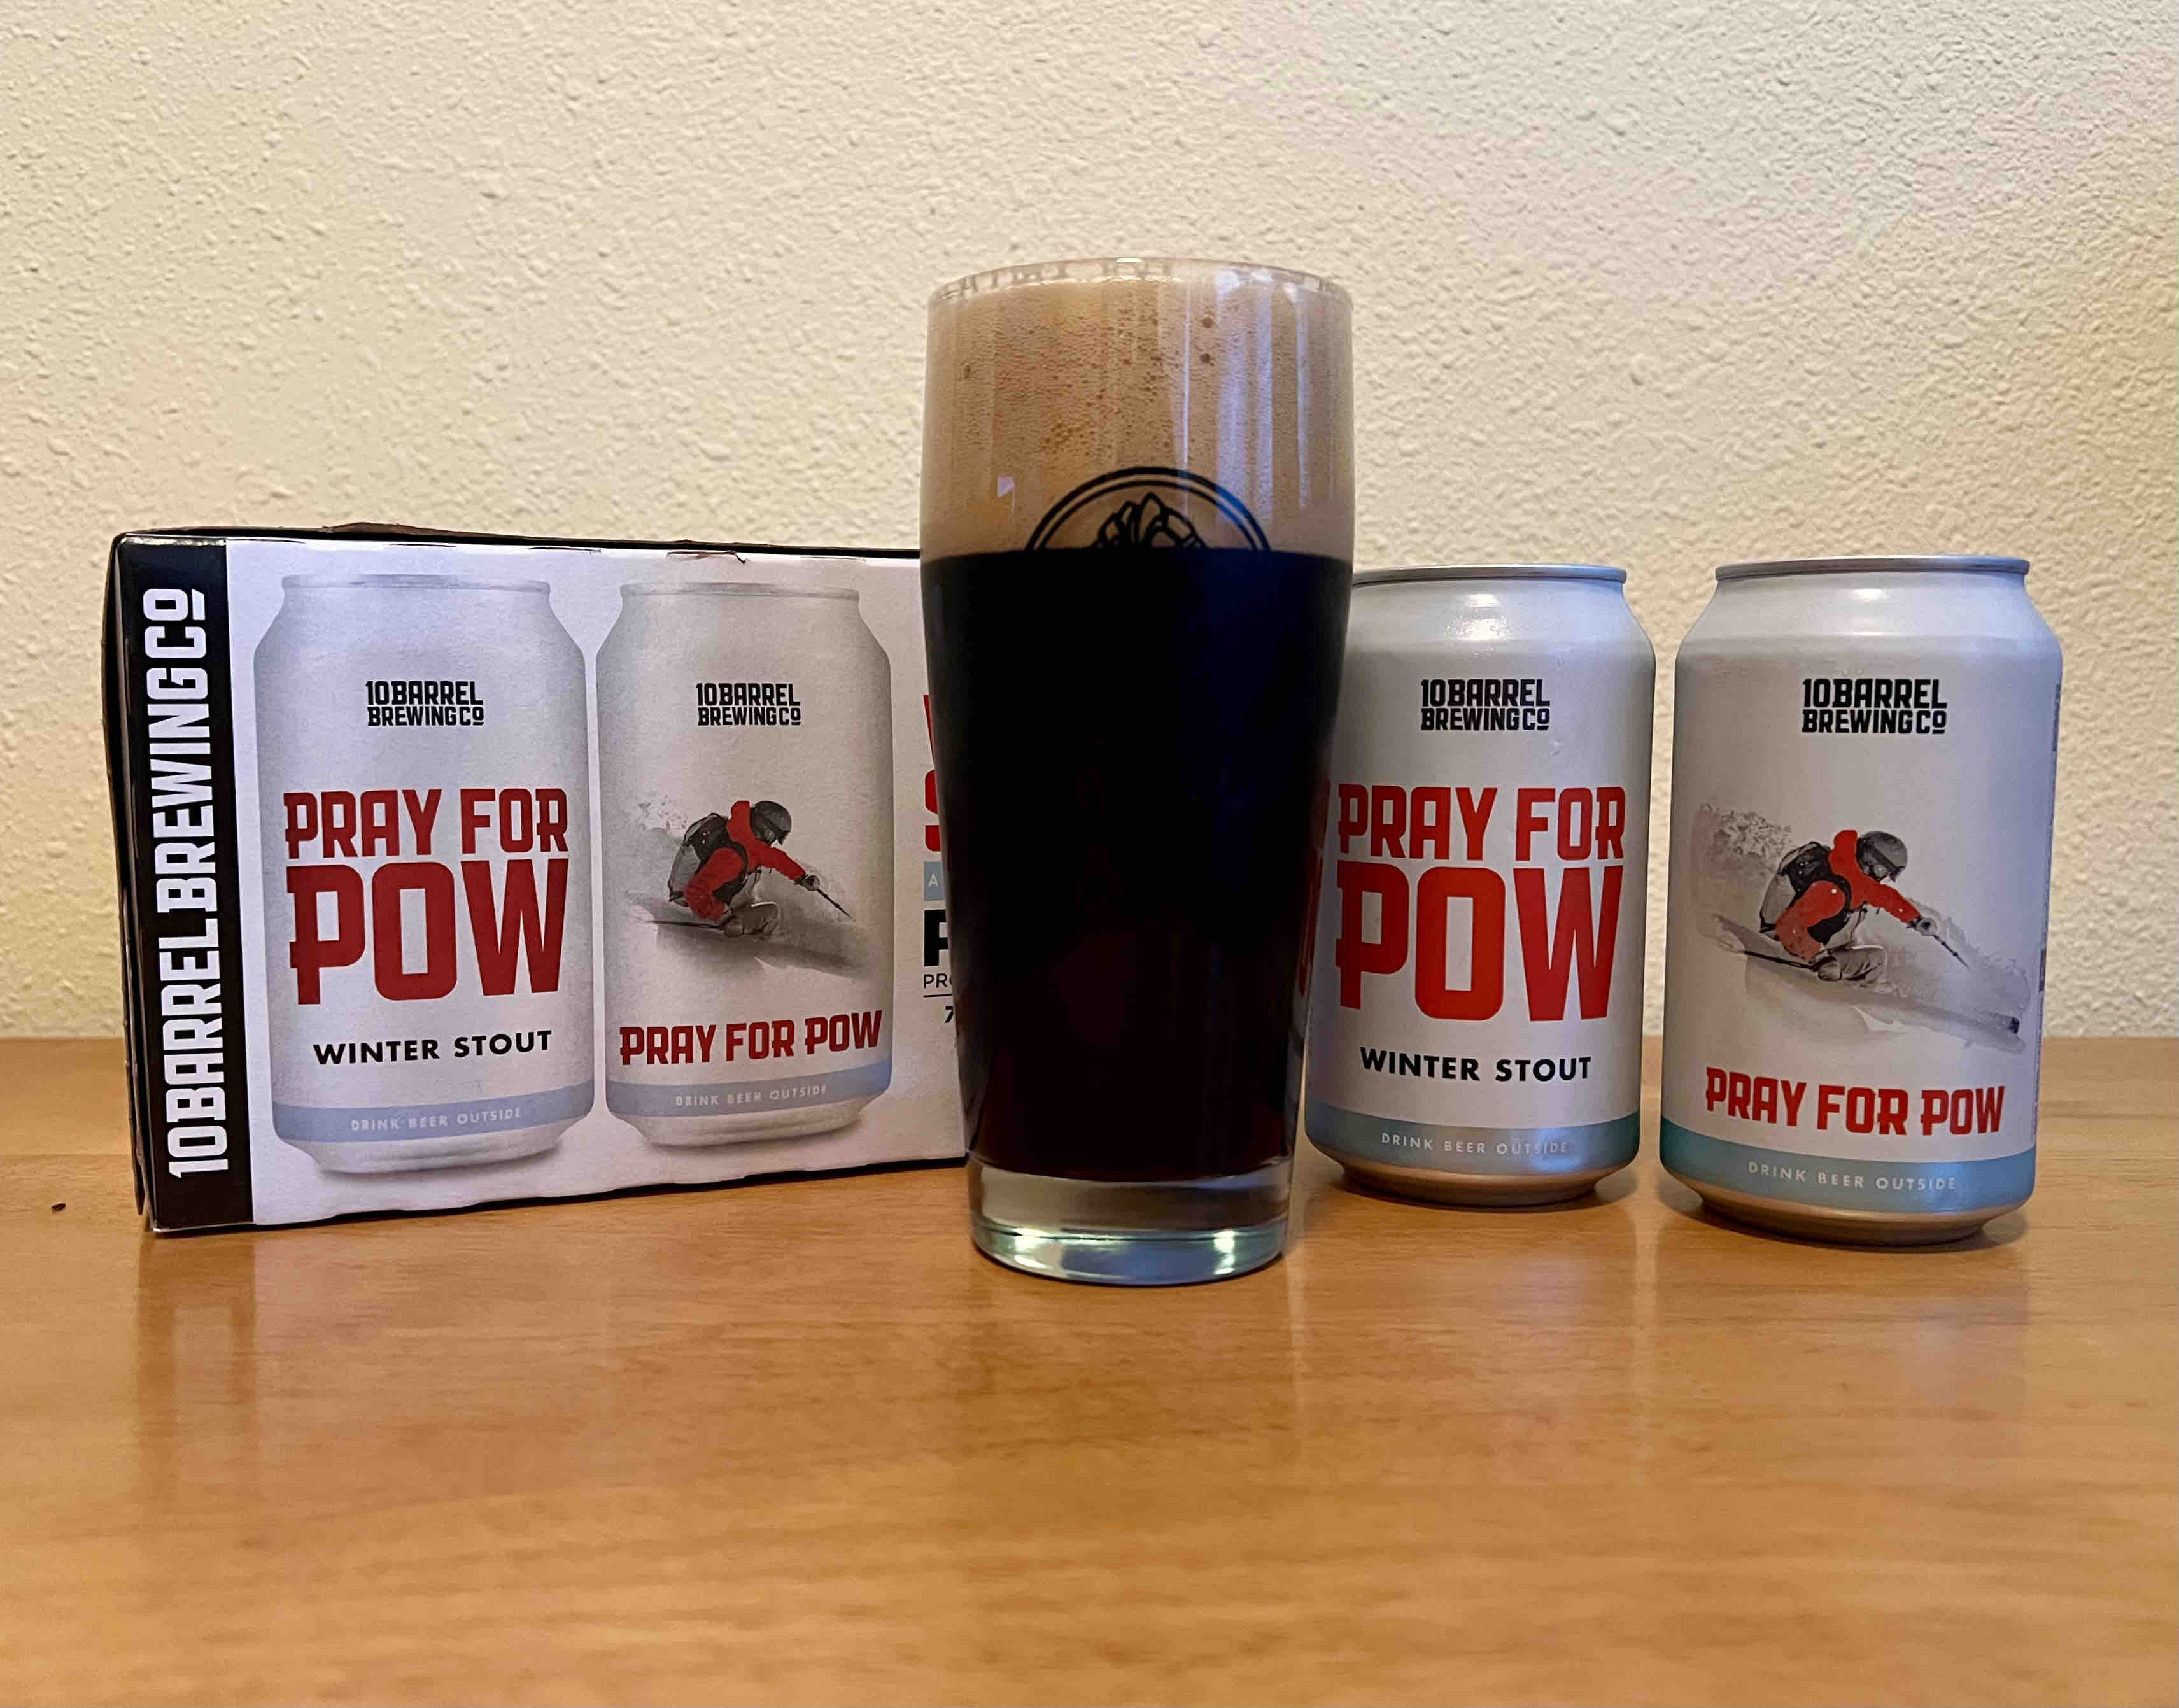 Pray For POW is the new winter seasonal stout from 10 Barrel Brewing